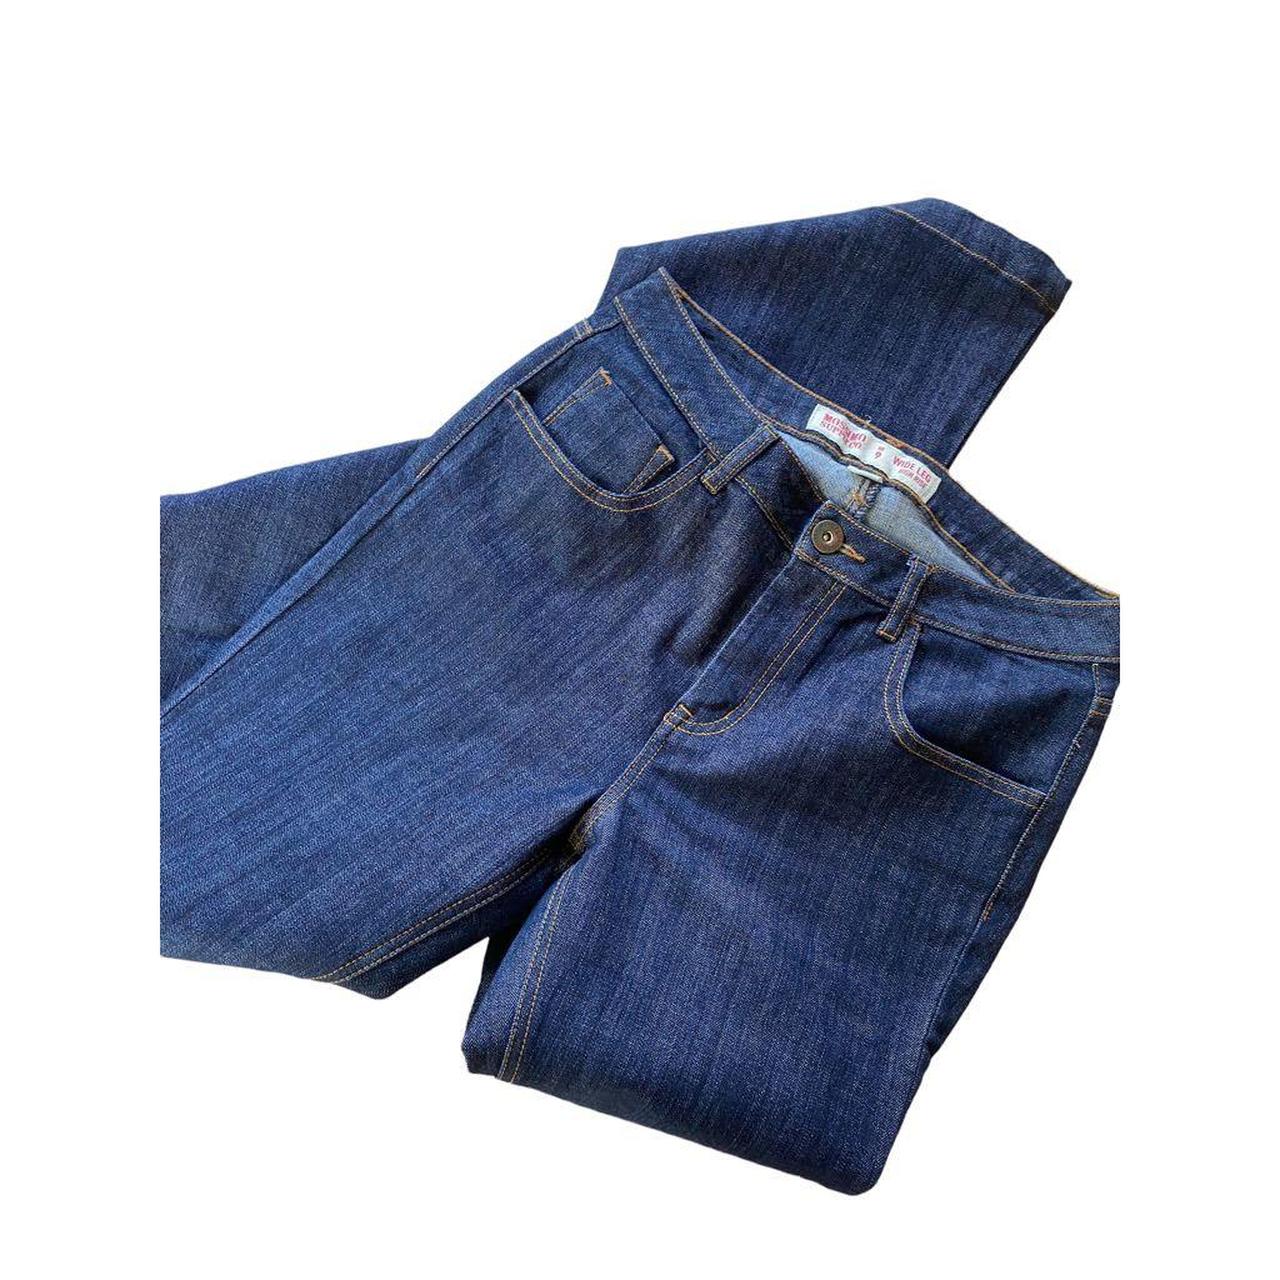 Product Image 2 - Mossimo bell bottom jeans size